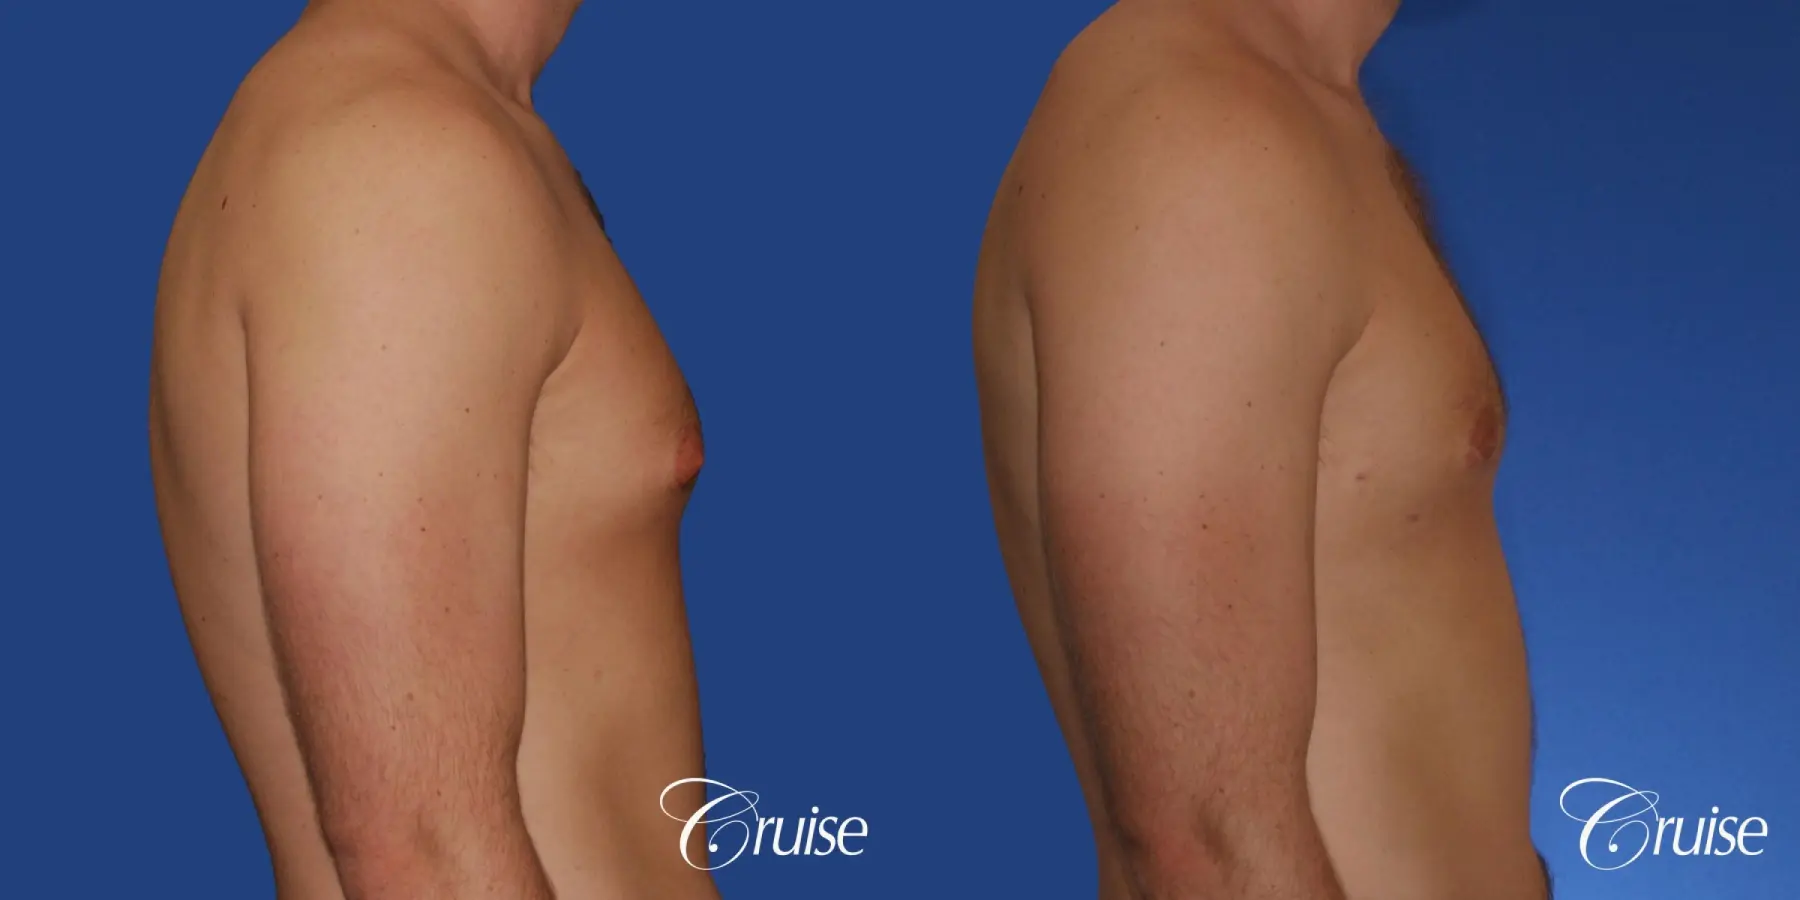 young adult with puffy nipple gets the best results with top gynecomastia surgeon - Before and After 2